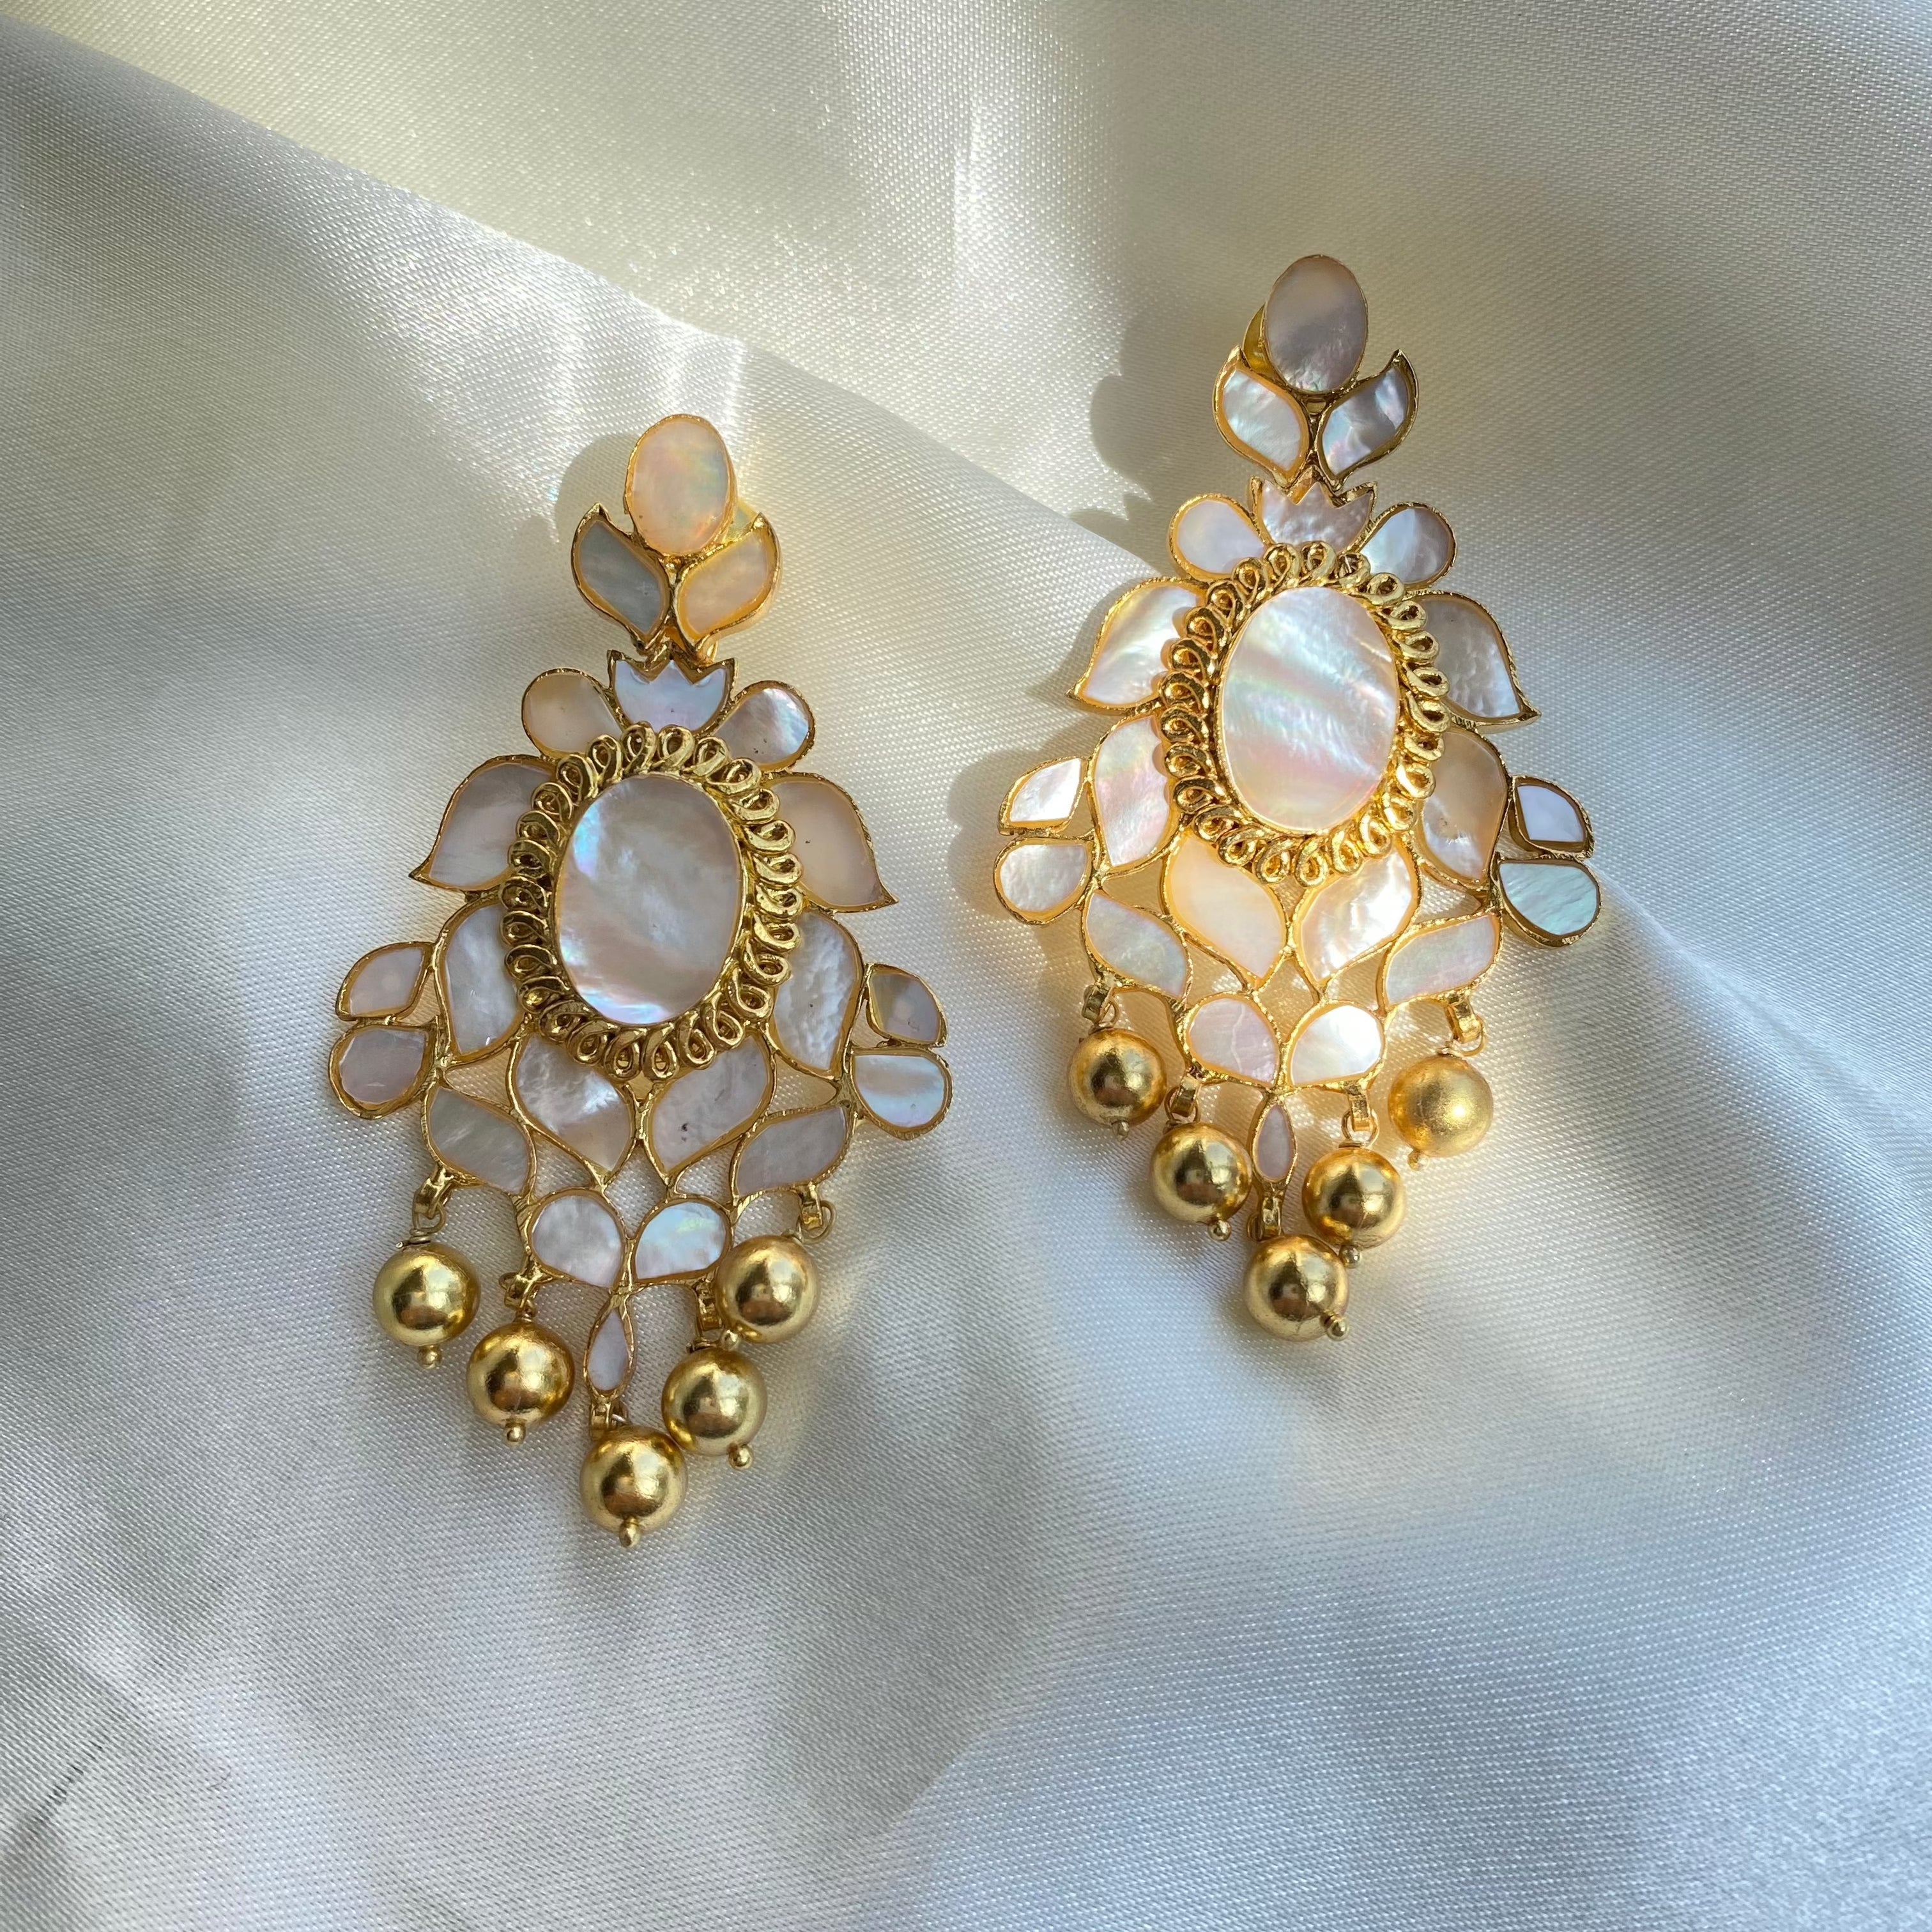 Maya Blossom Earrings - Mother of Pearl with Gold drops